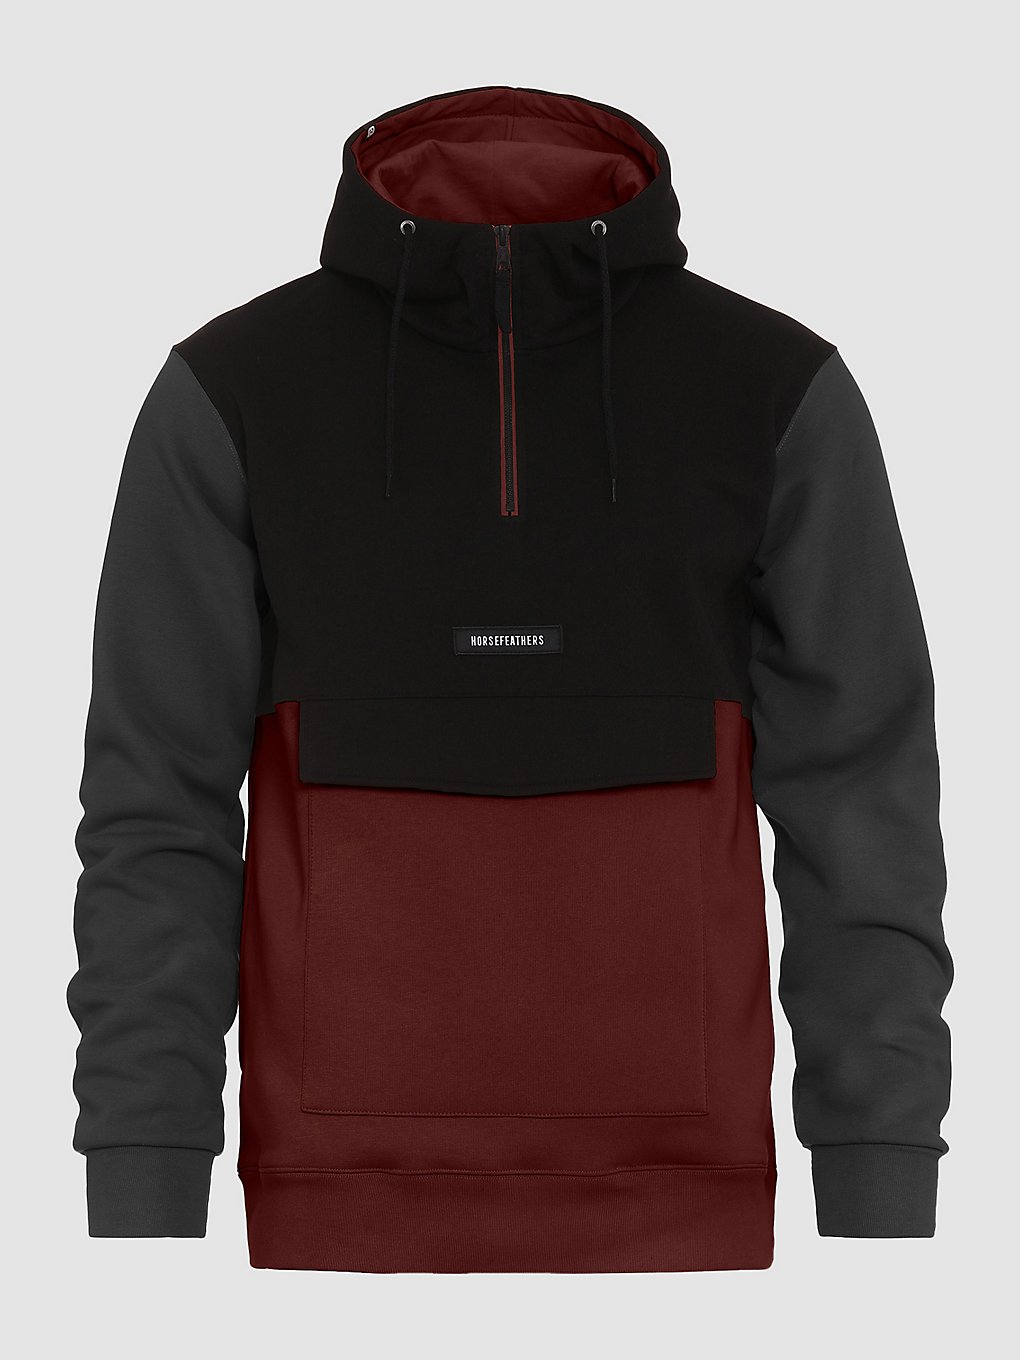 Horsefeathers Milo Hoodie red pear kaufen